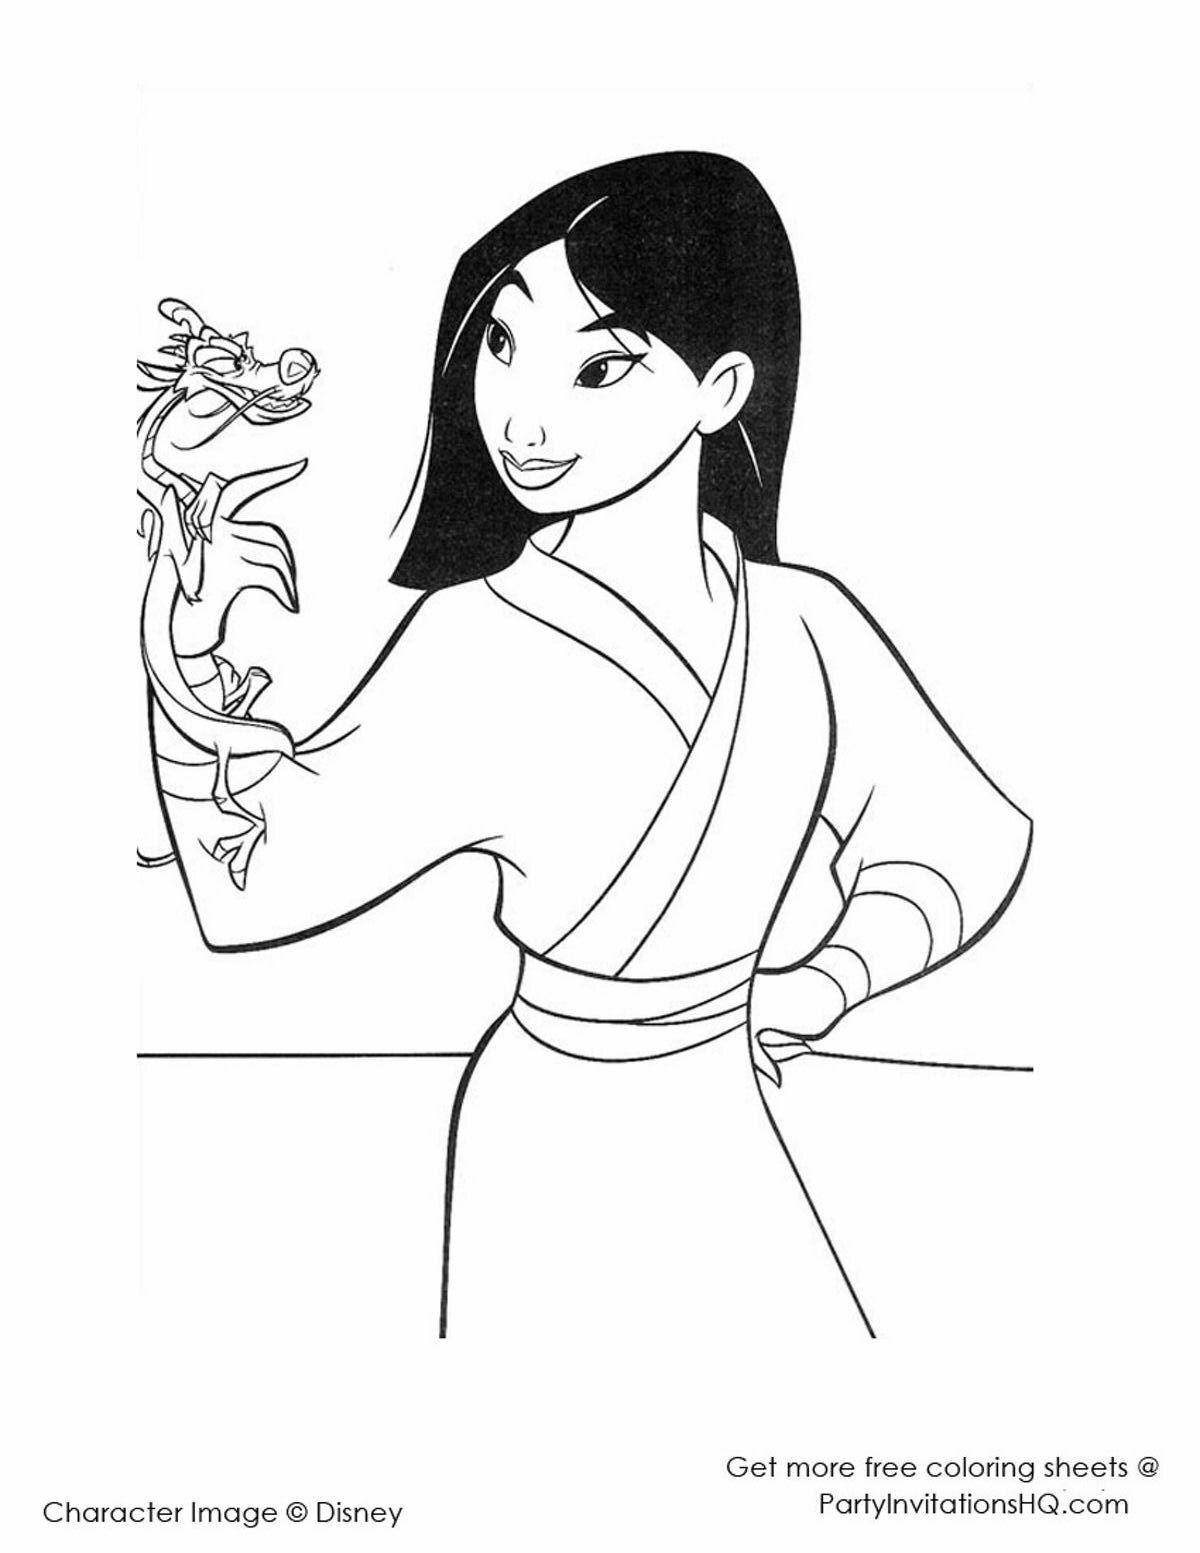 Coloring : Mulan Coloring Page Pageant Dresses For Sale. Pageant ...